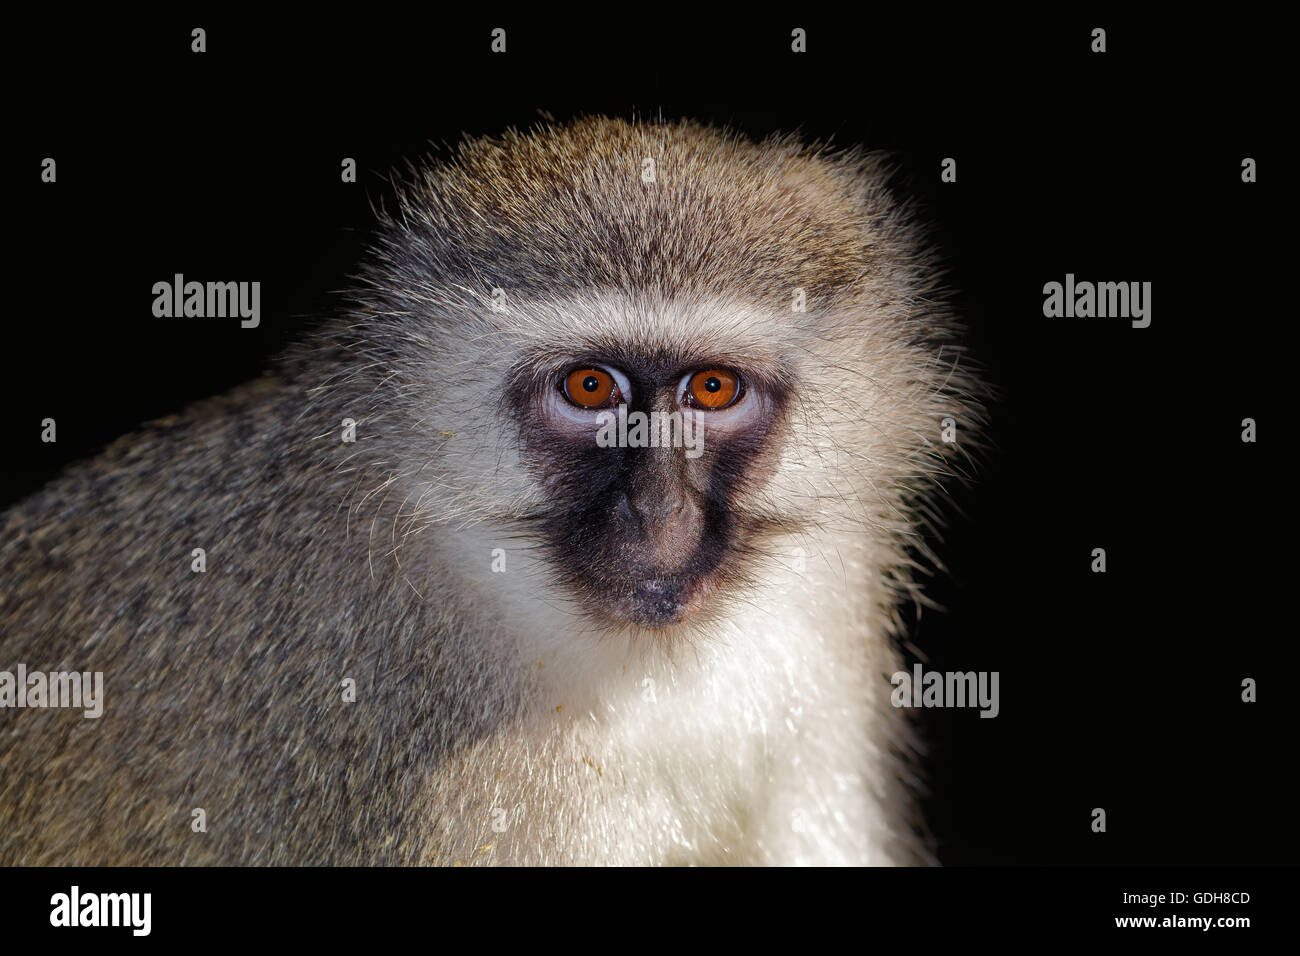 Portrait of a vervet monkey (Cercopithecus aethiops) against a dark background, South Africa Stock Photo